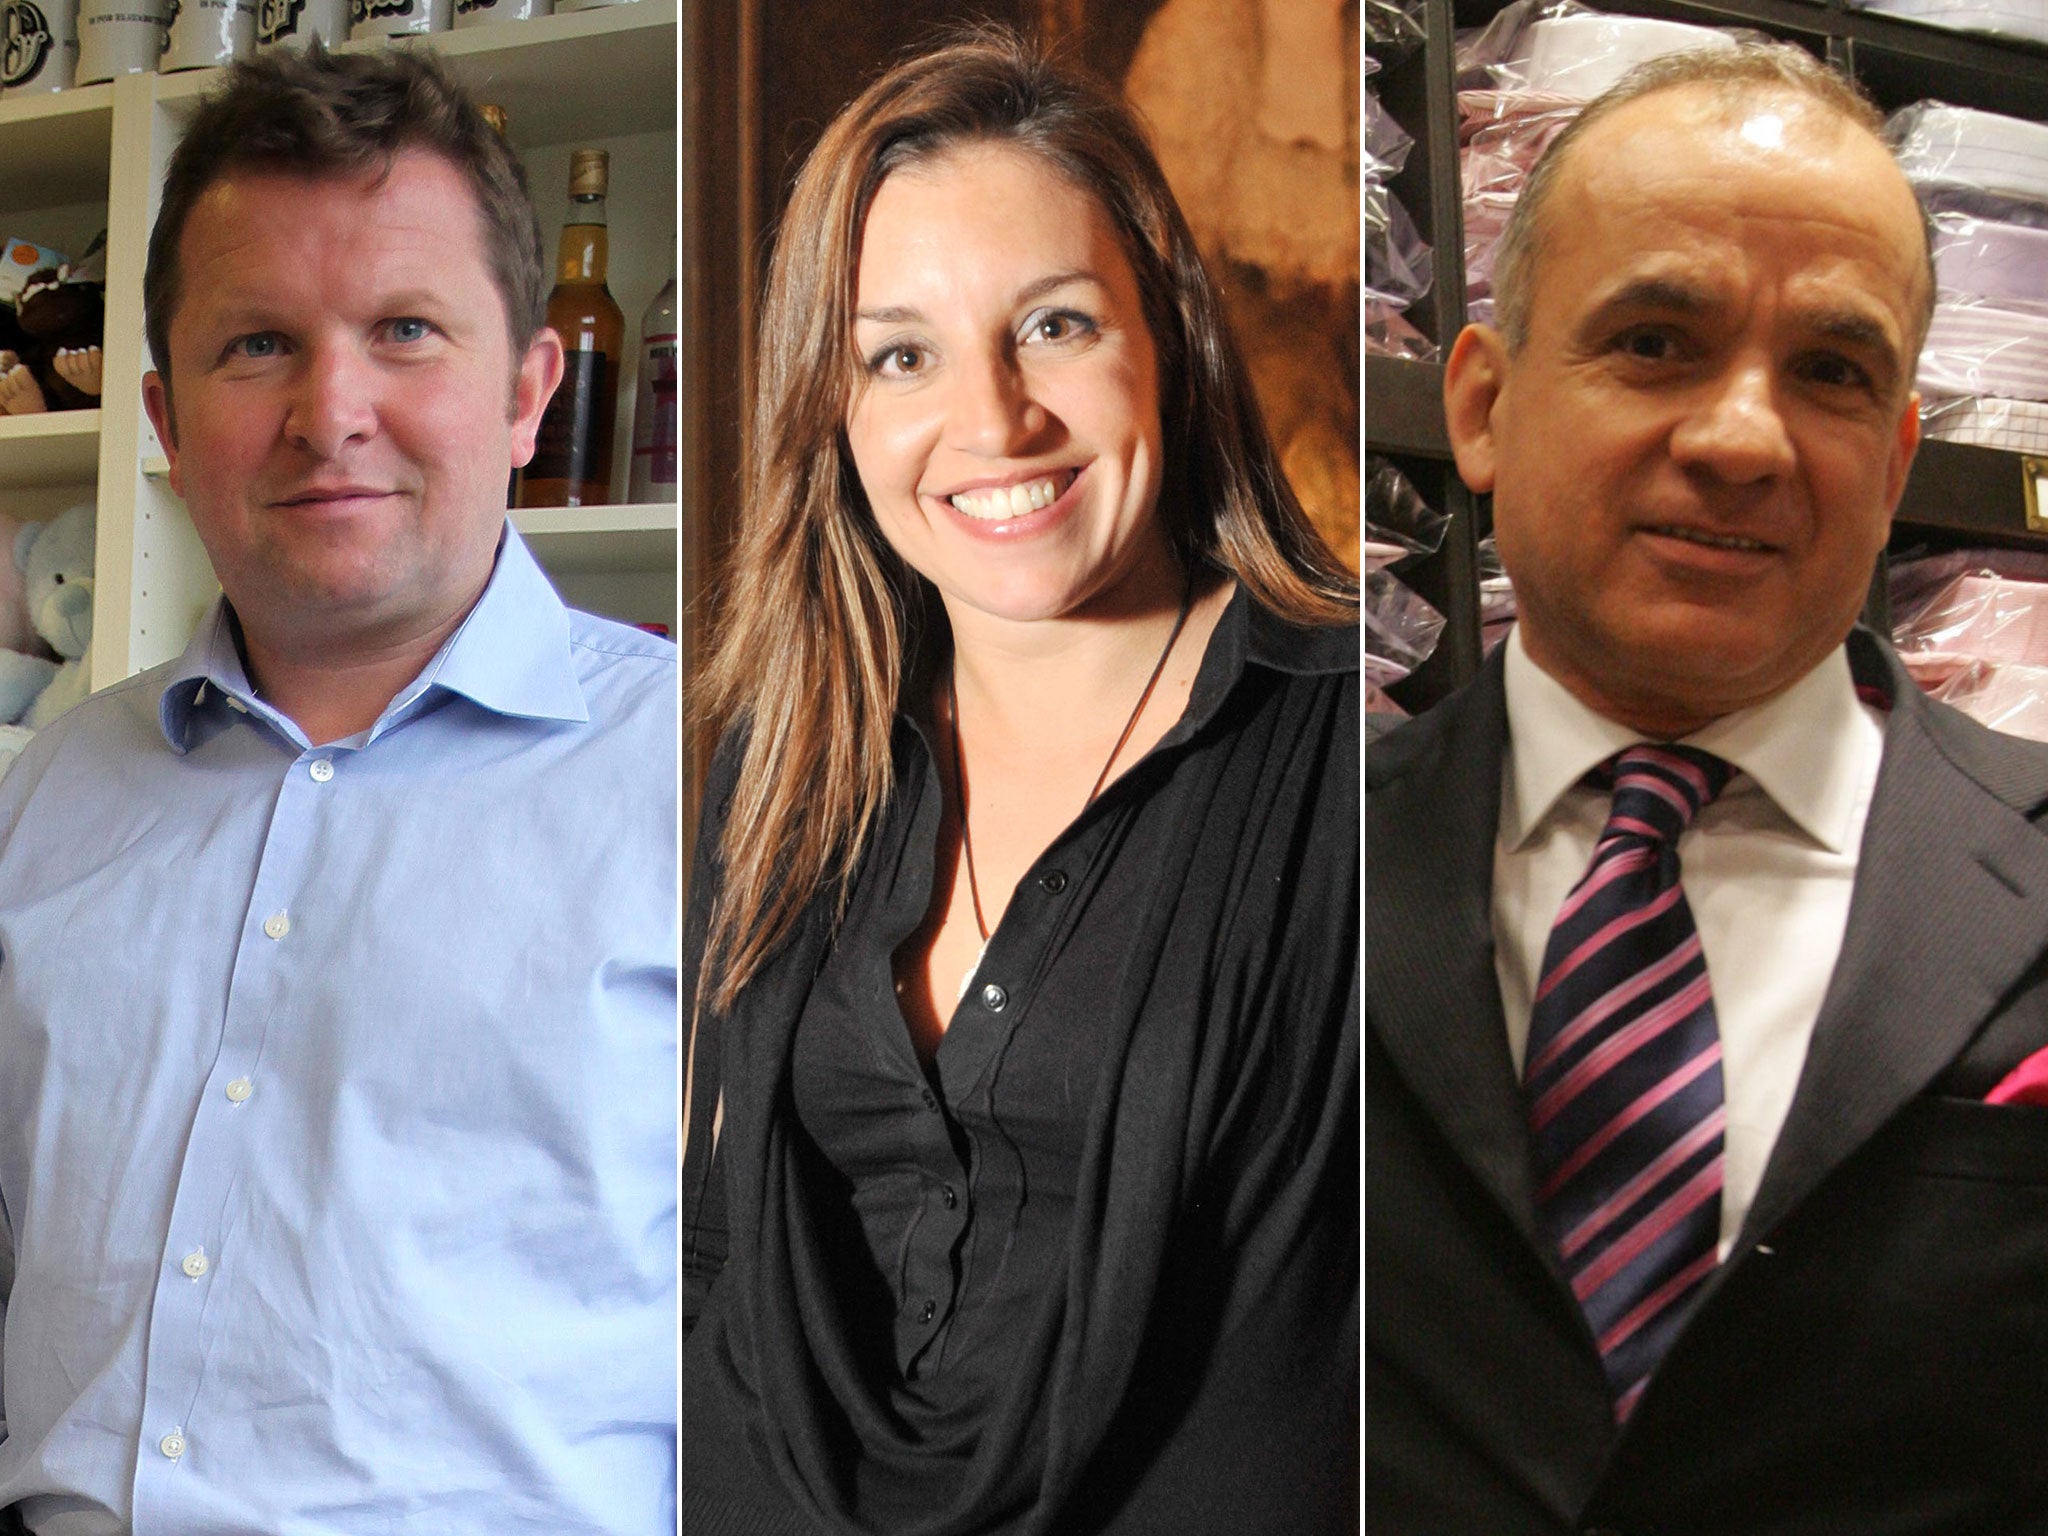 Nick Jenkins, Sarah Willingham and Touker Suleyman are joining Dragons' Den